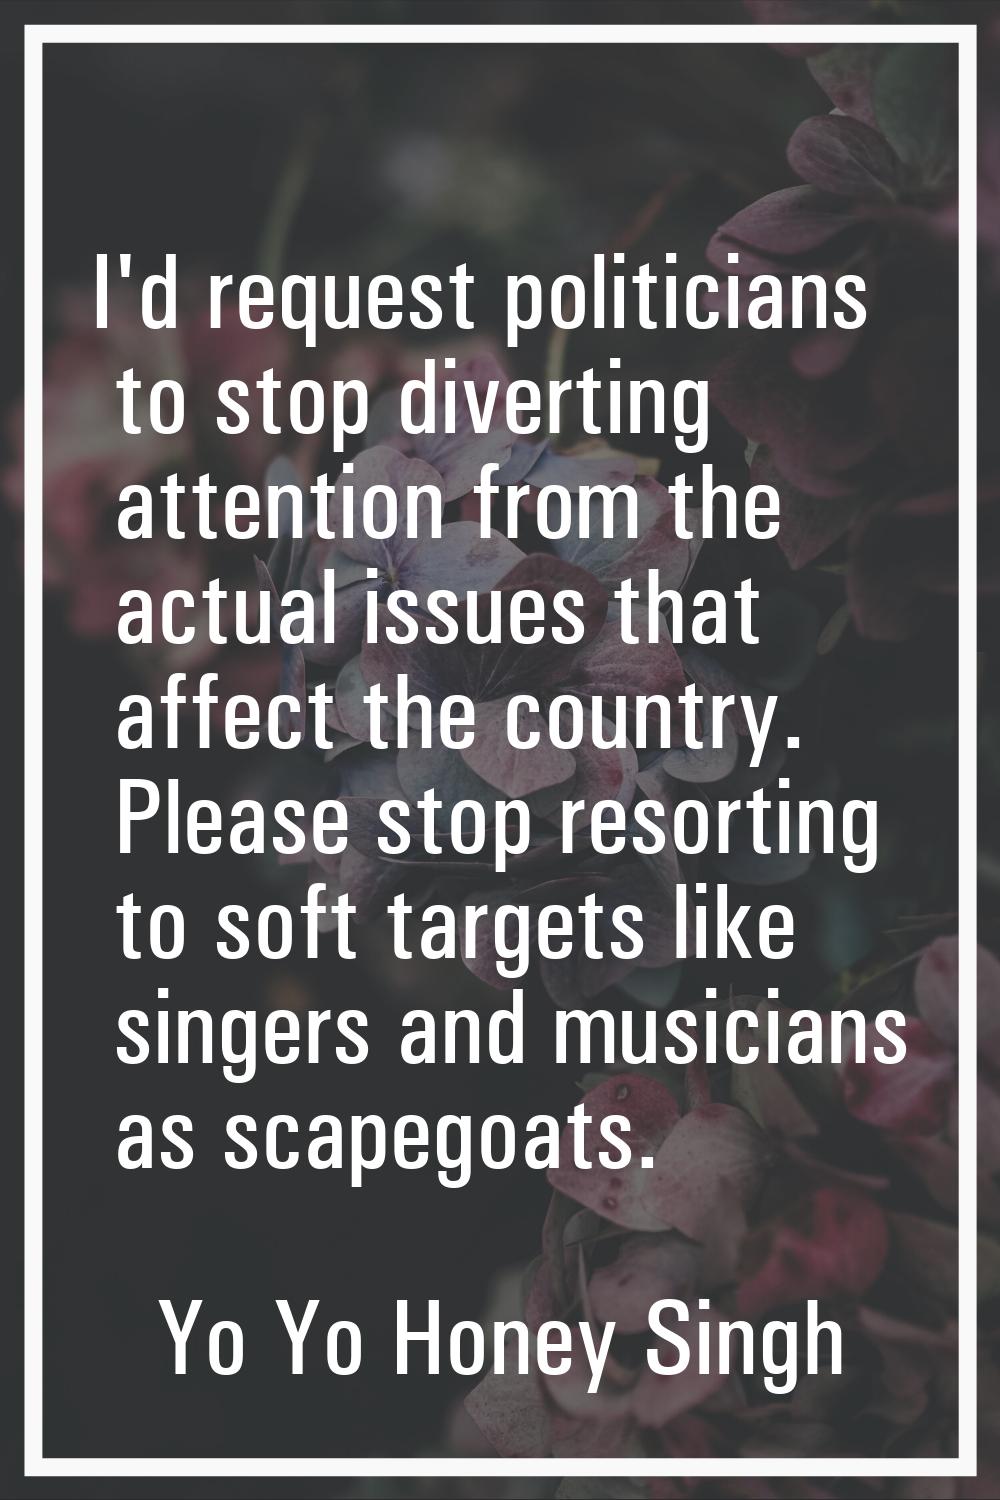 I'd request politicians to stop diverting attention from the actual issues that affect the country.